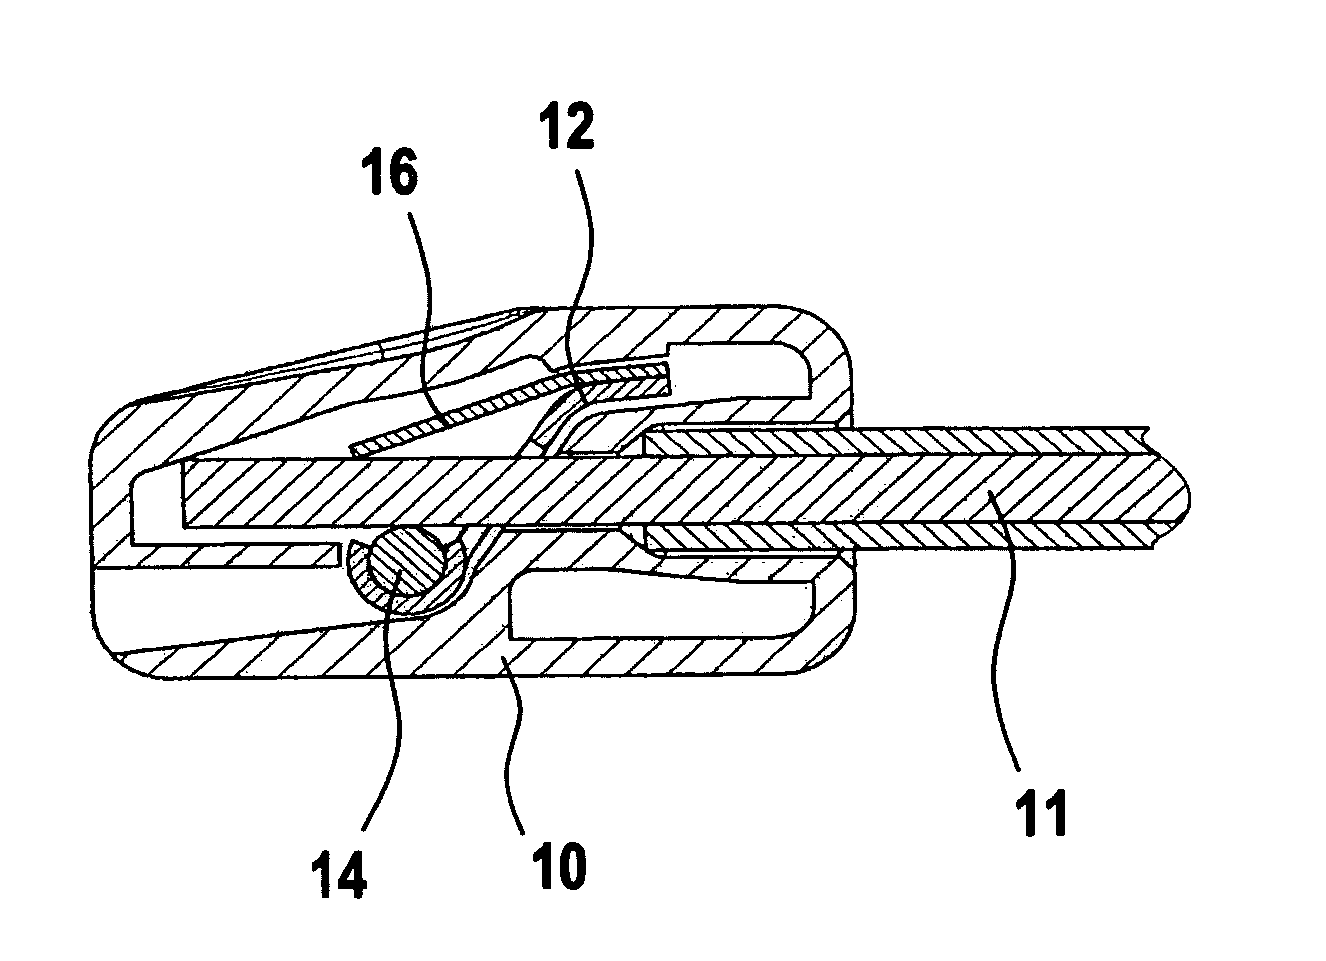 Clamp terminal for connecting electrical conductors